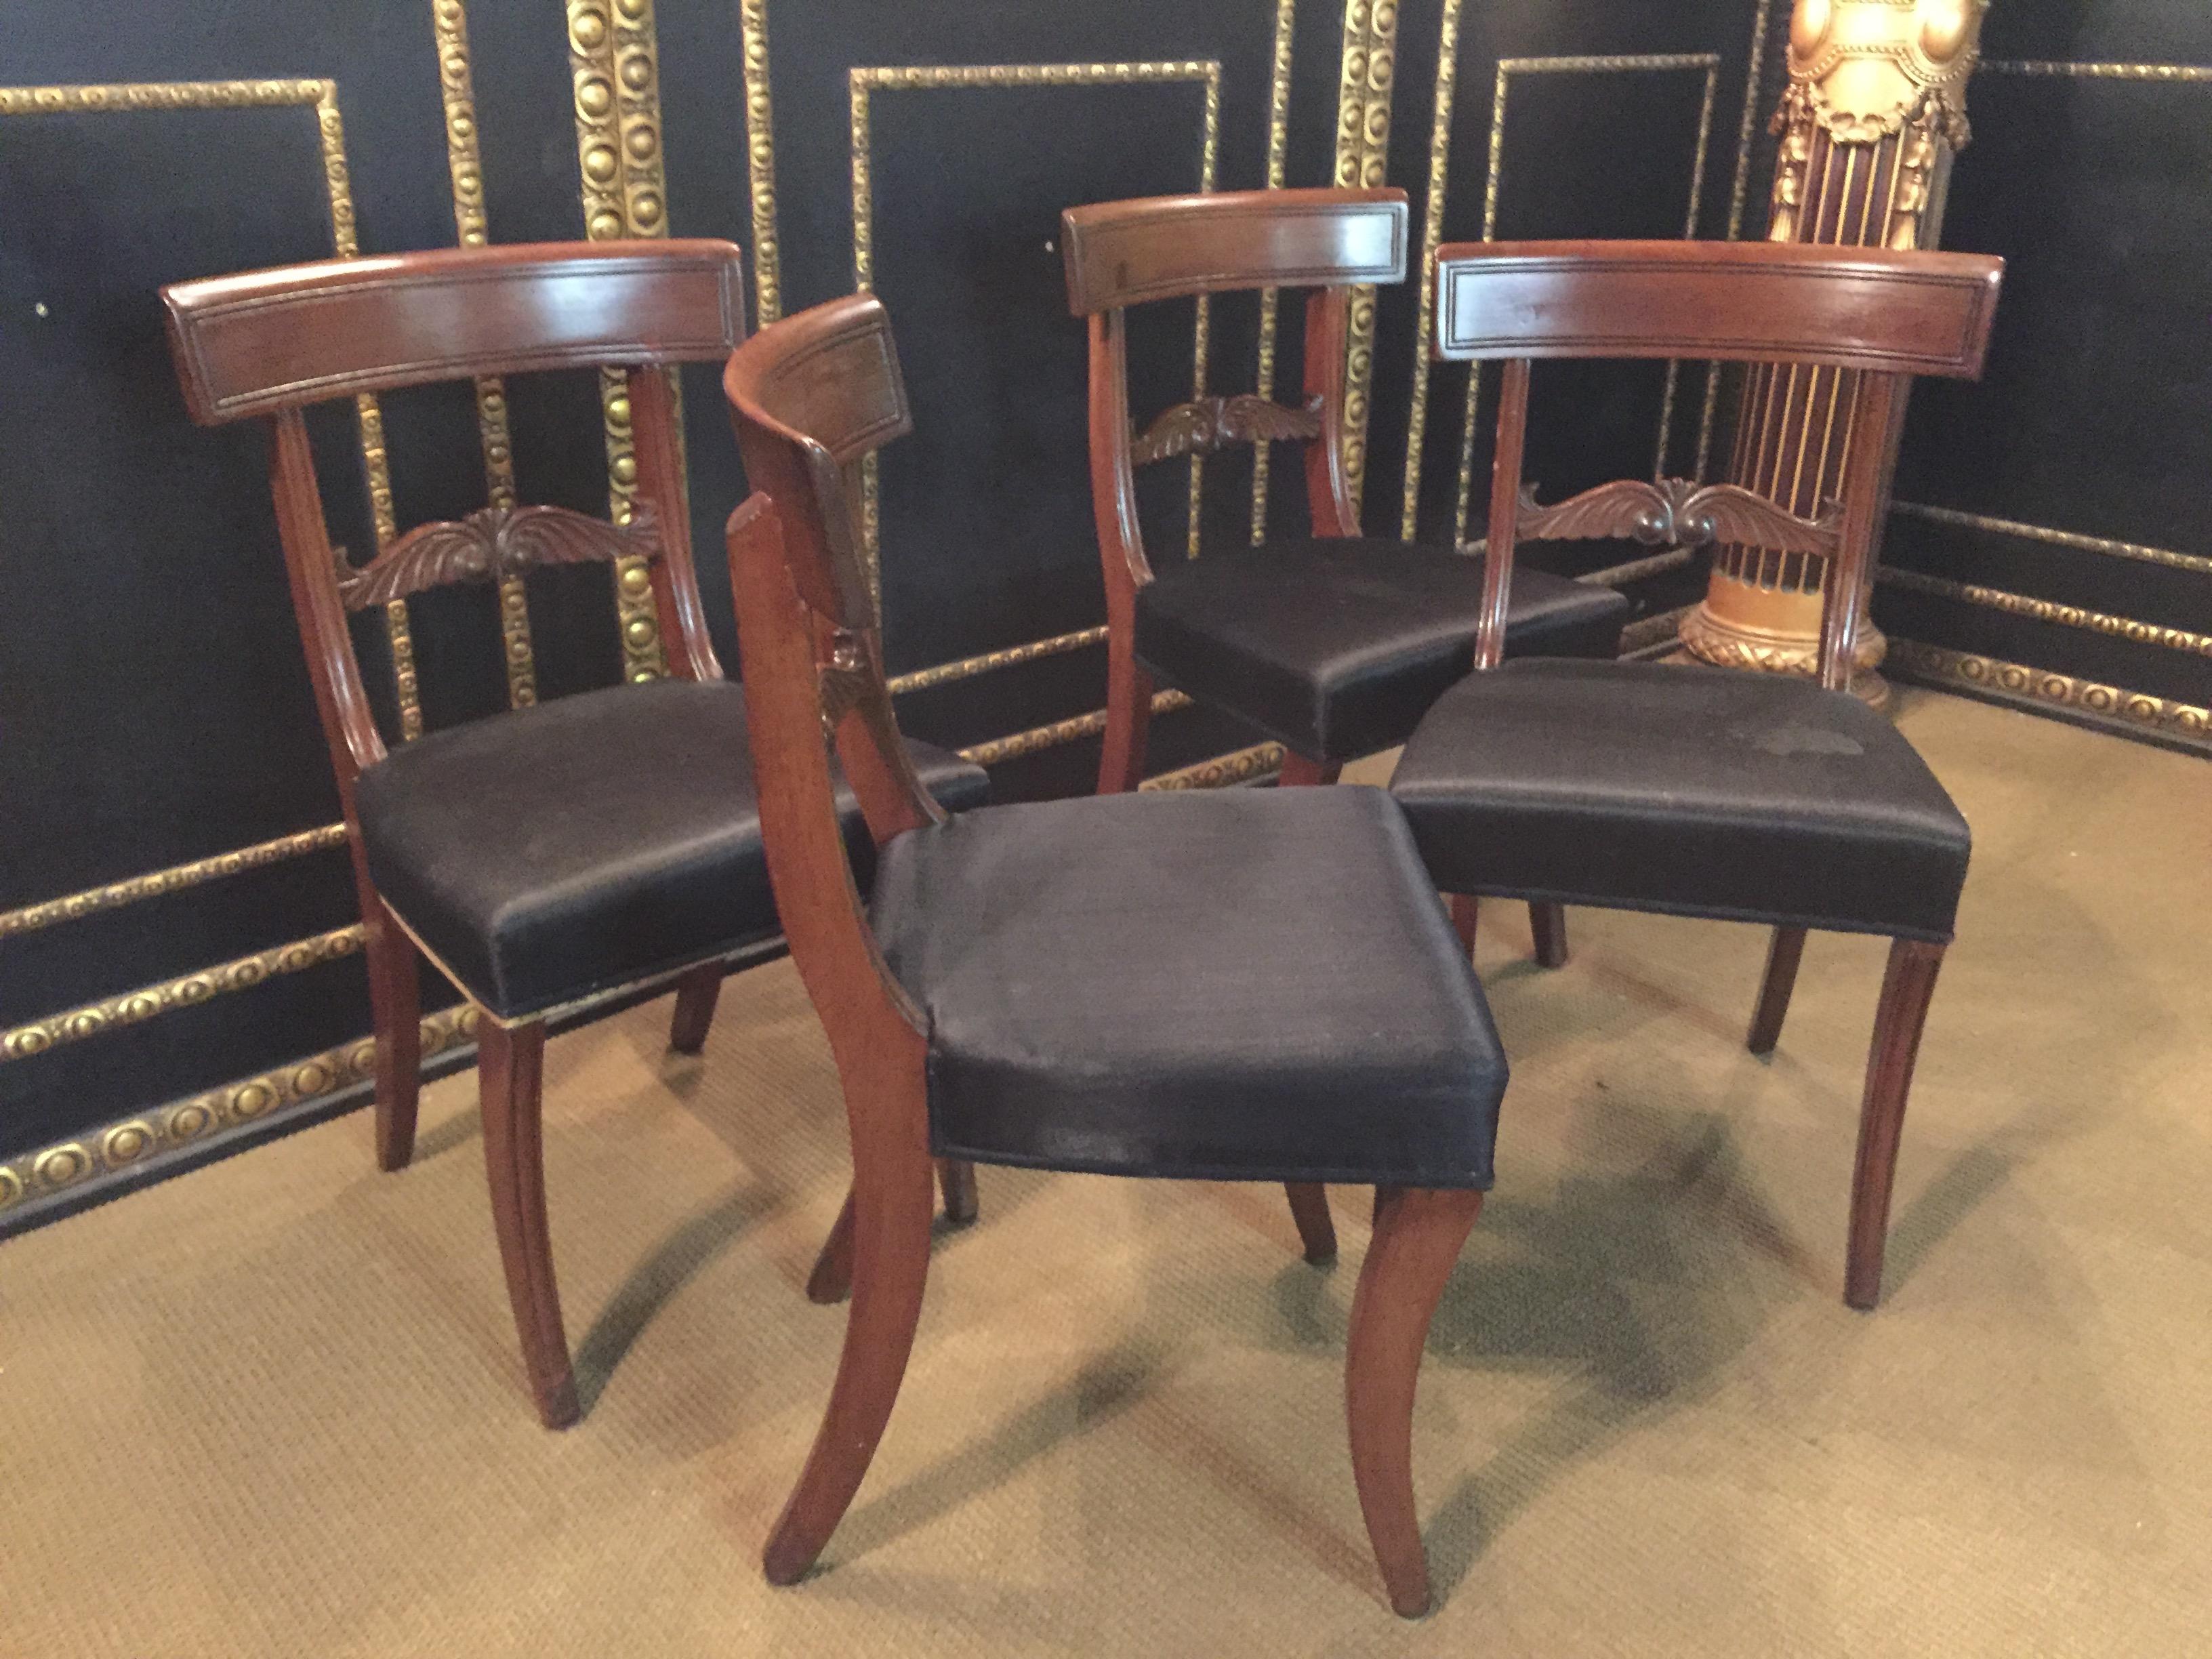 19th Century 4 Biedermeier Saber-Legs Chairs Are Solid Mahogany 3